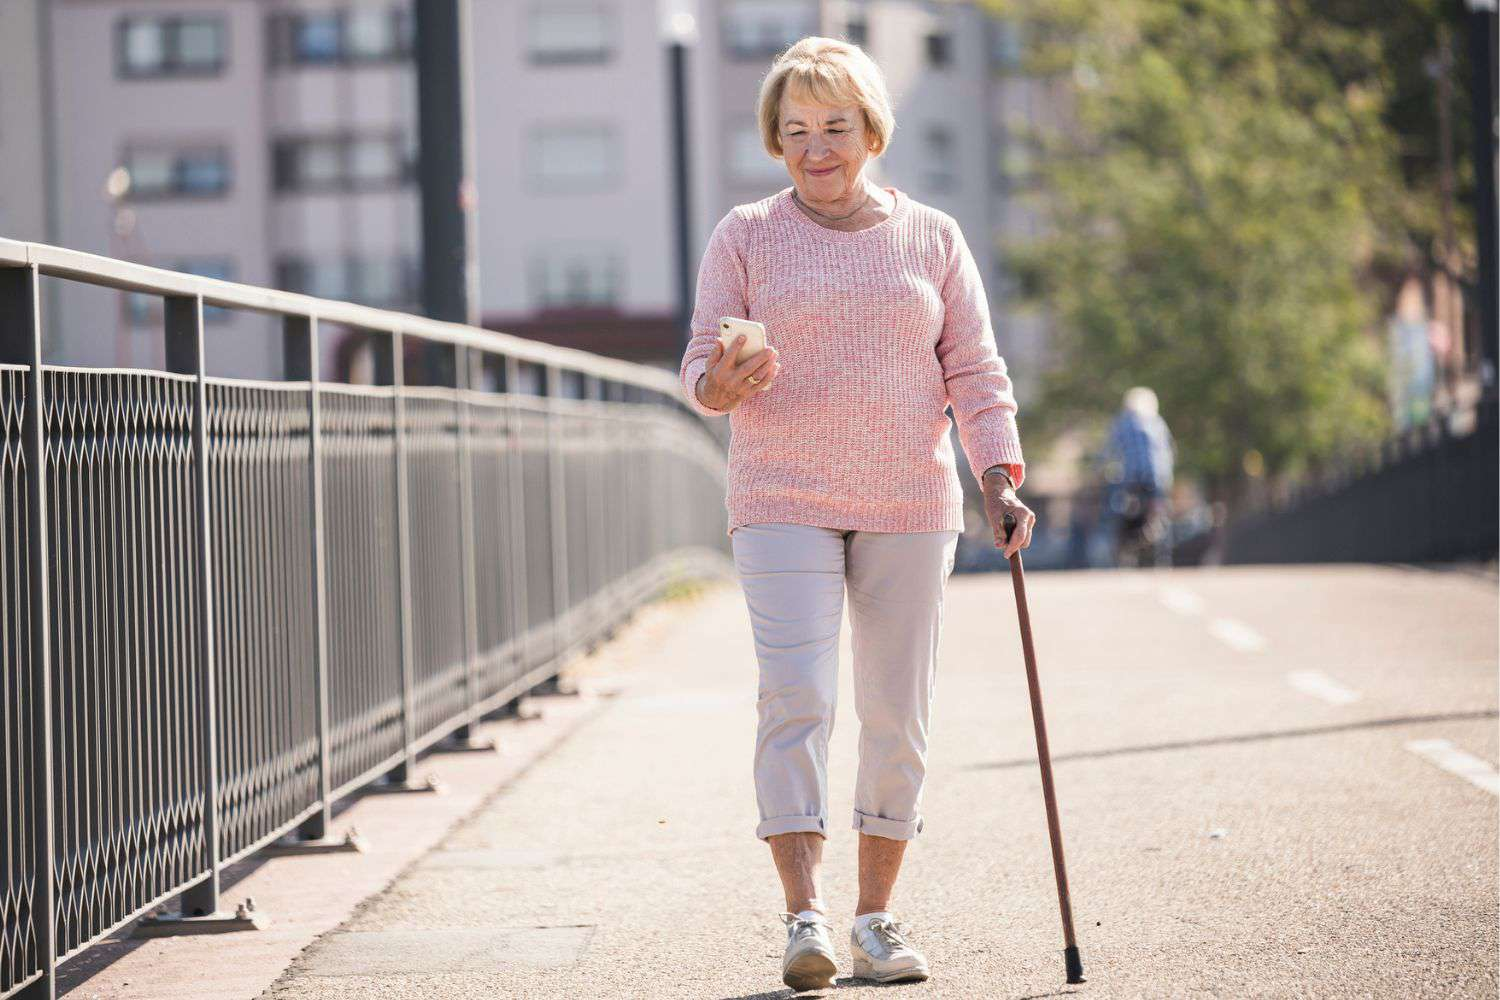 strength training, prevent falls, healthy aging, older adults,